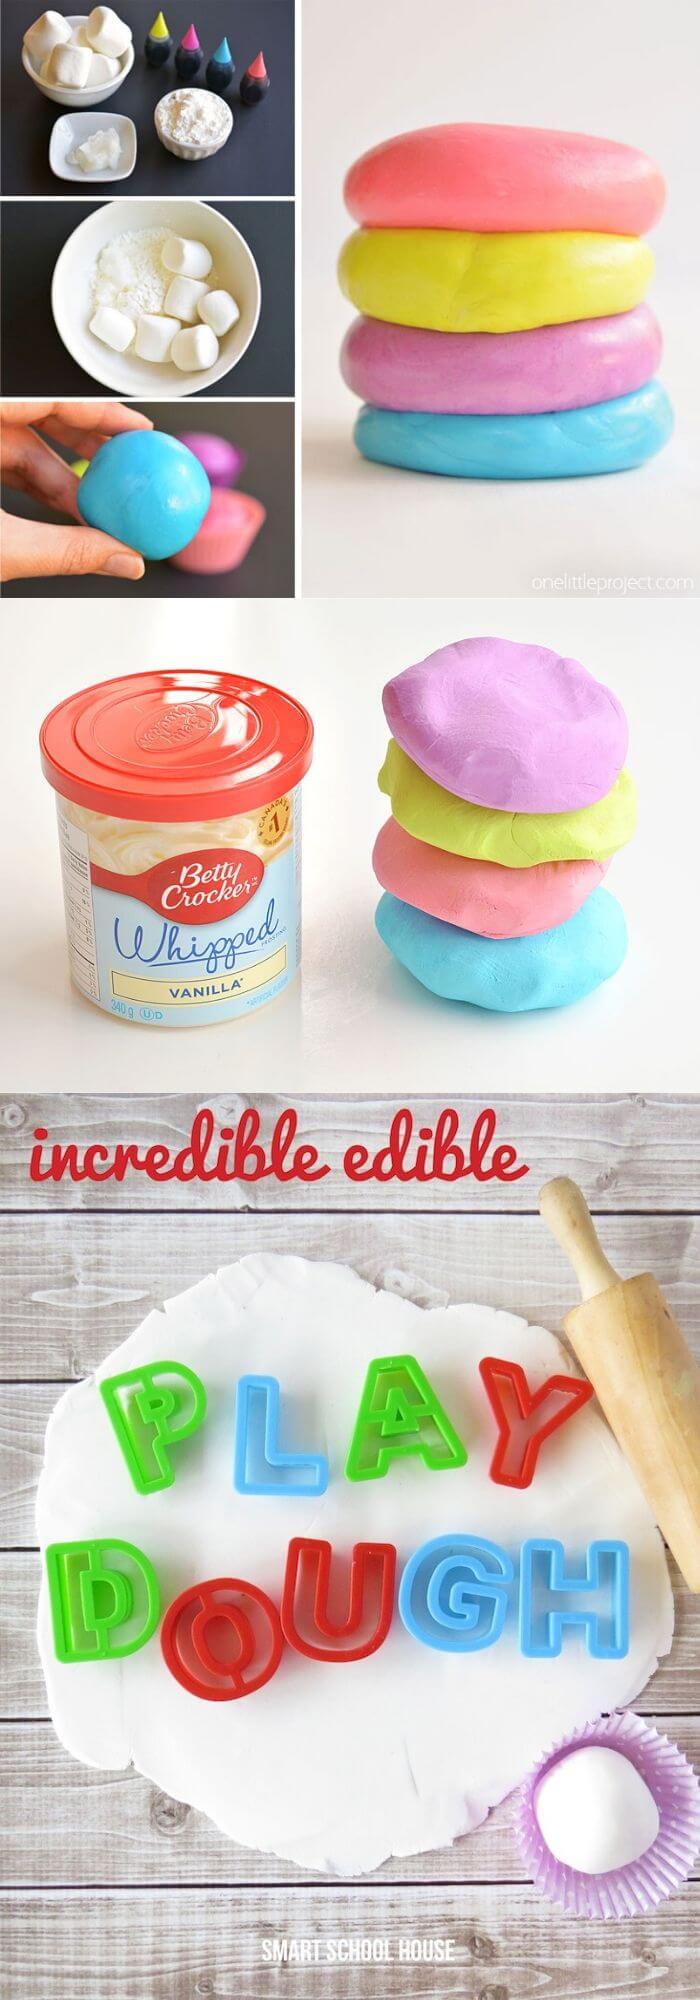 Edible playdough is an eye catcher for your kids too